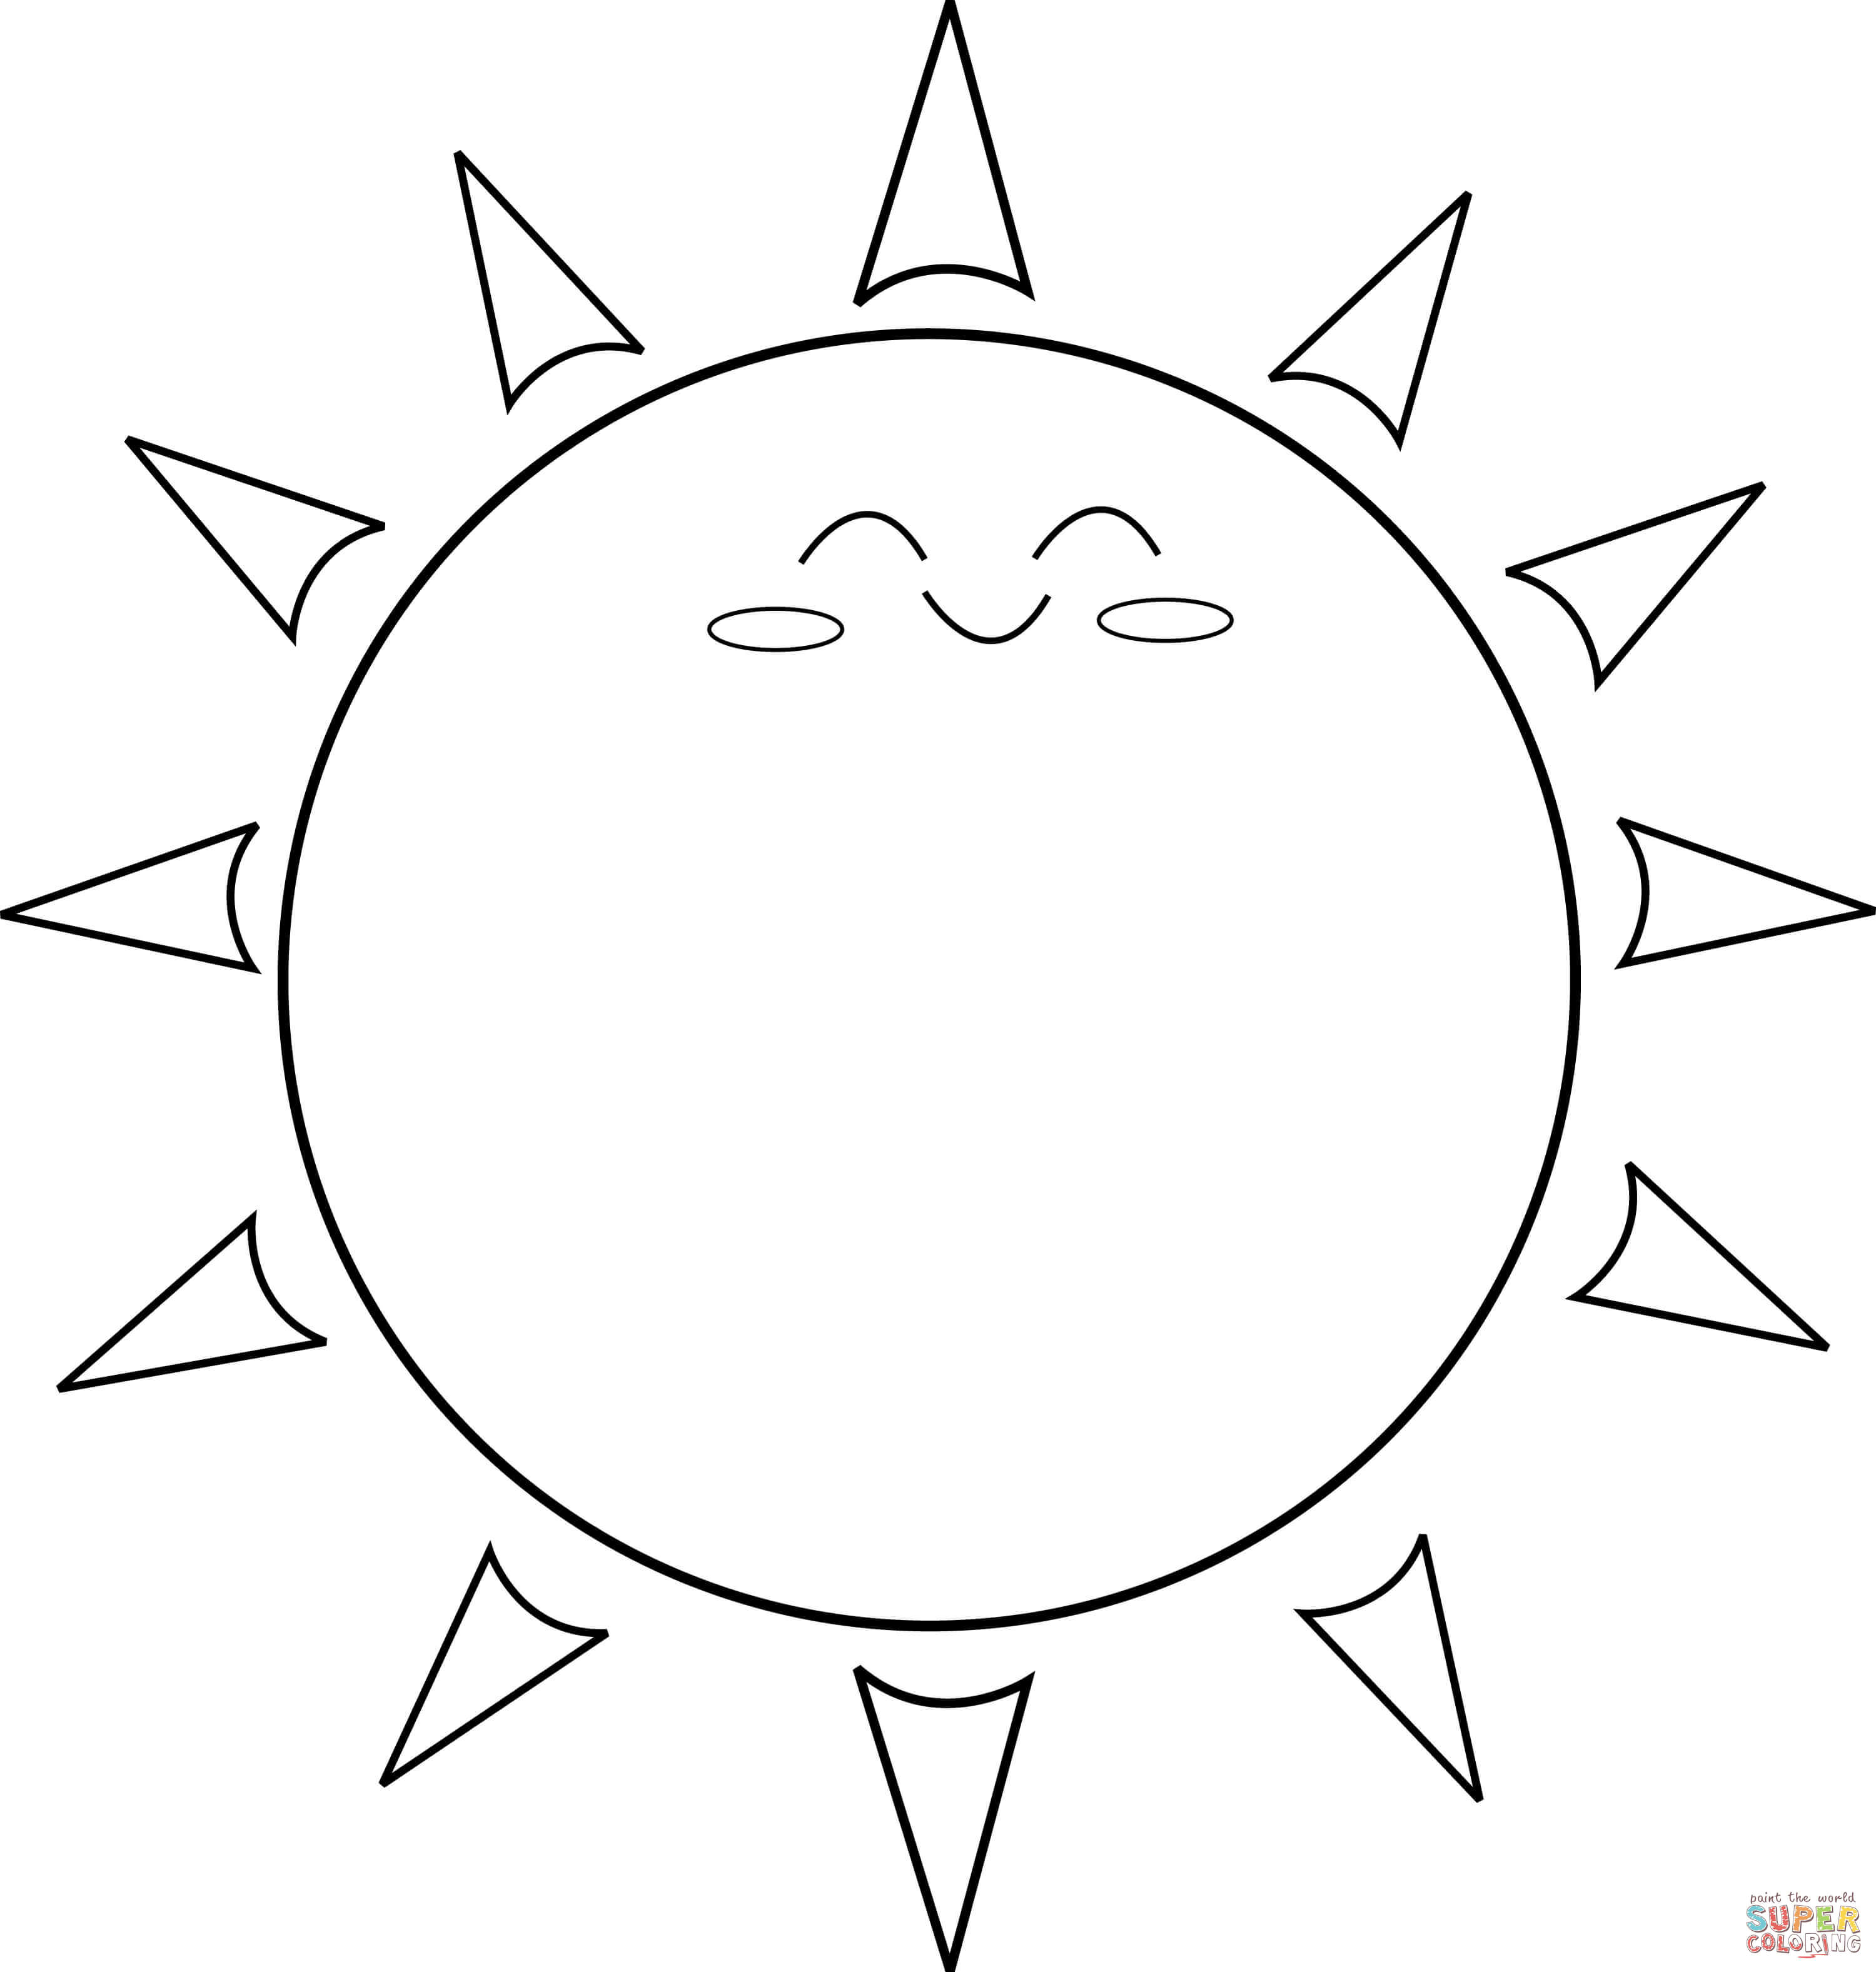 Happy sun coloring page free printable coloring pages